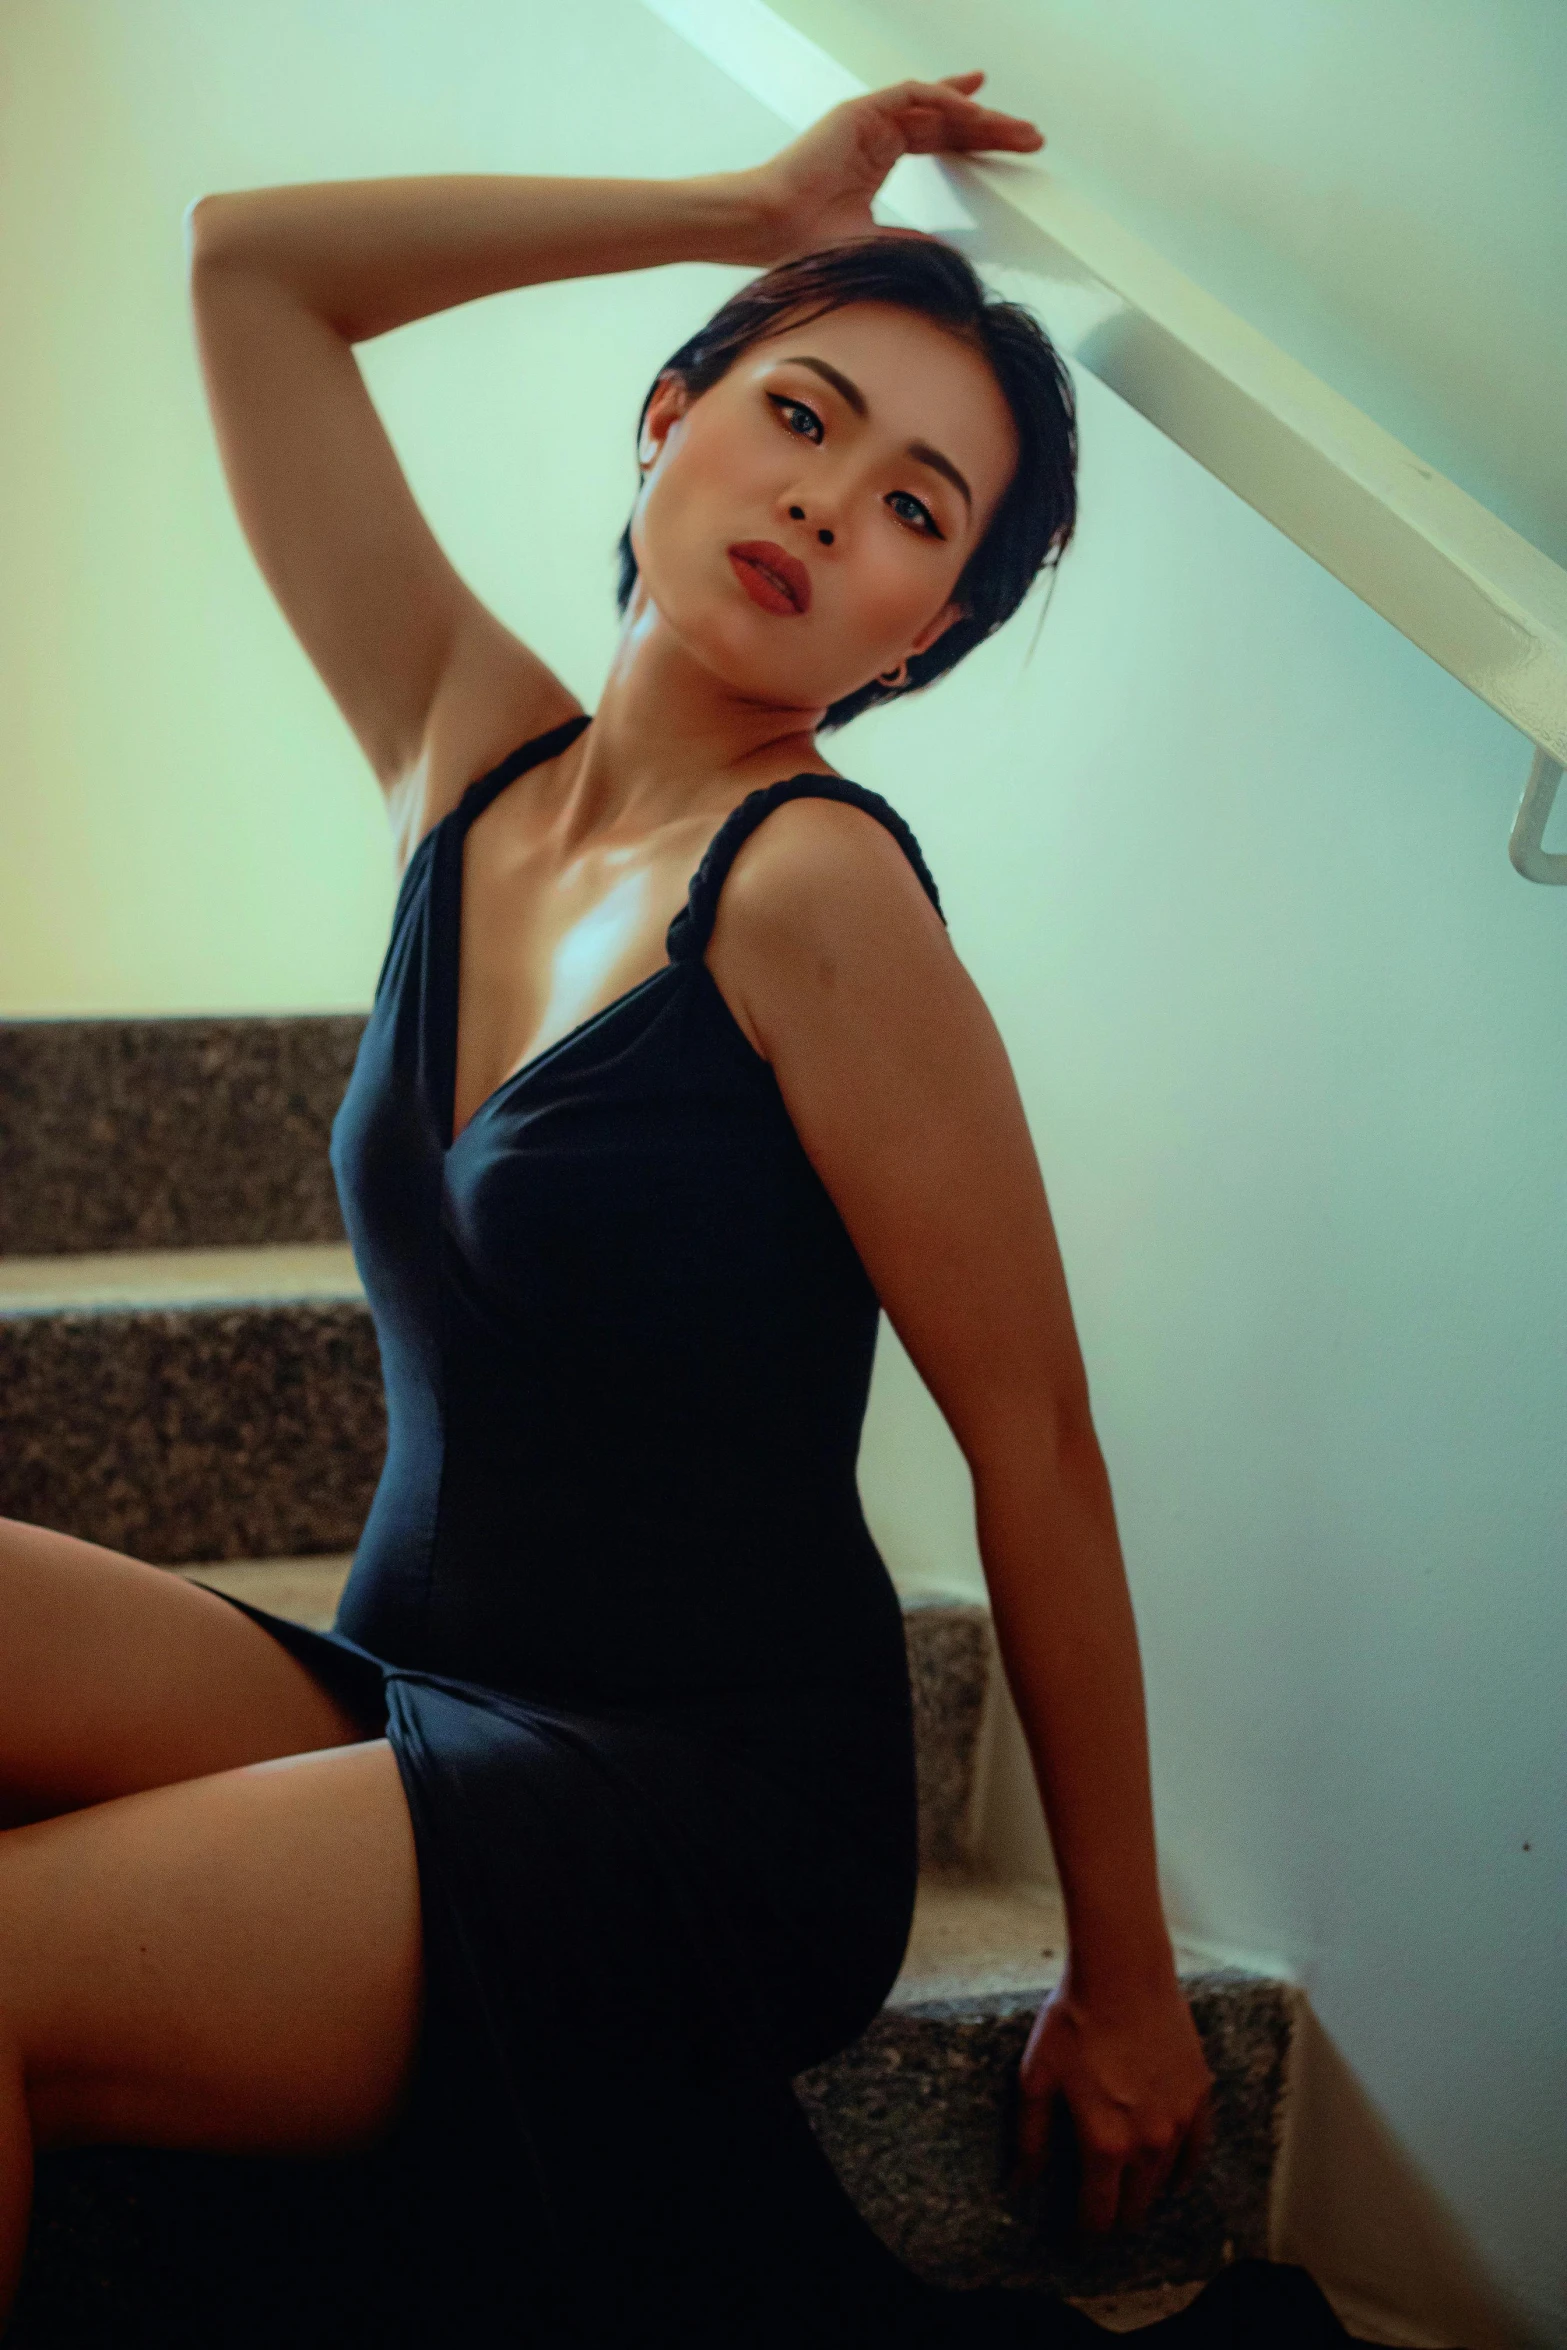 a woman posing on the step of stairs